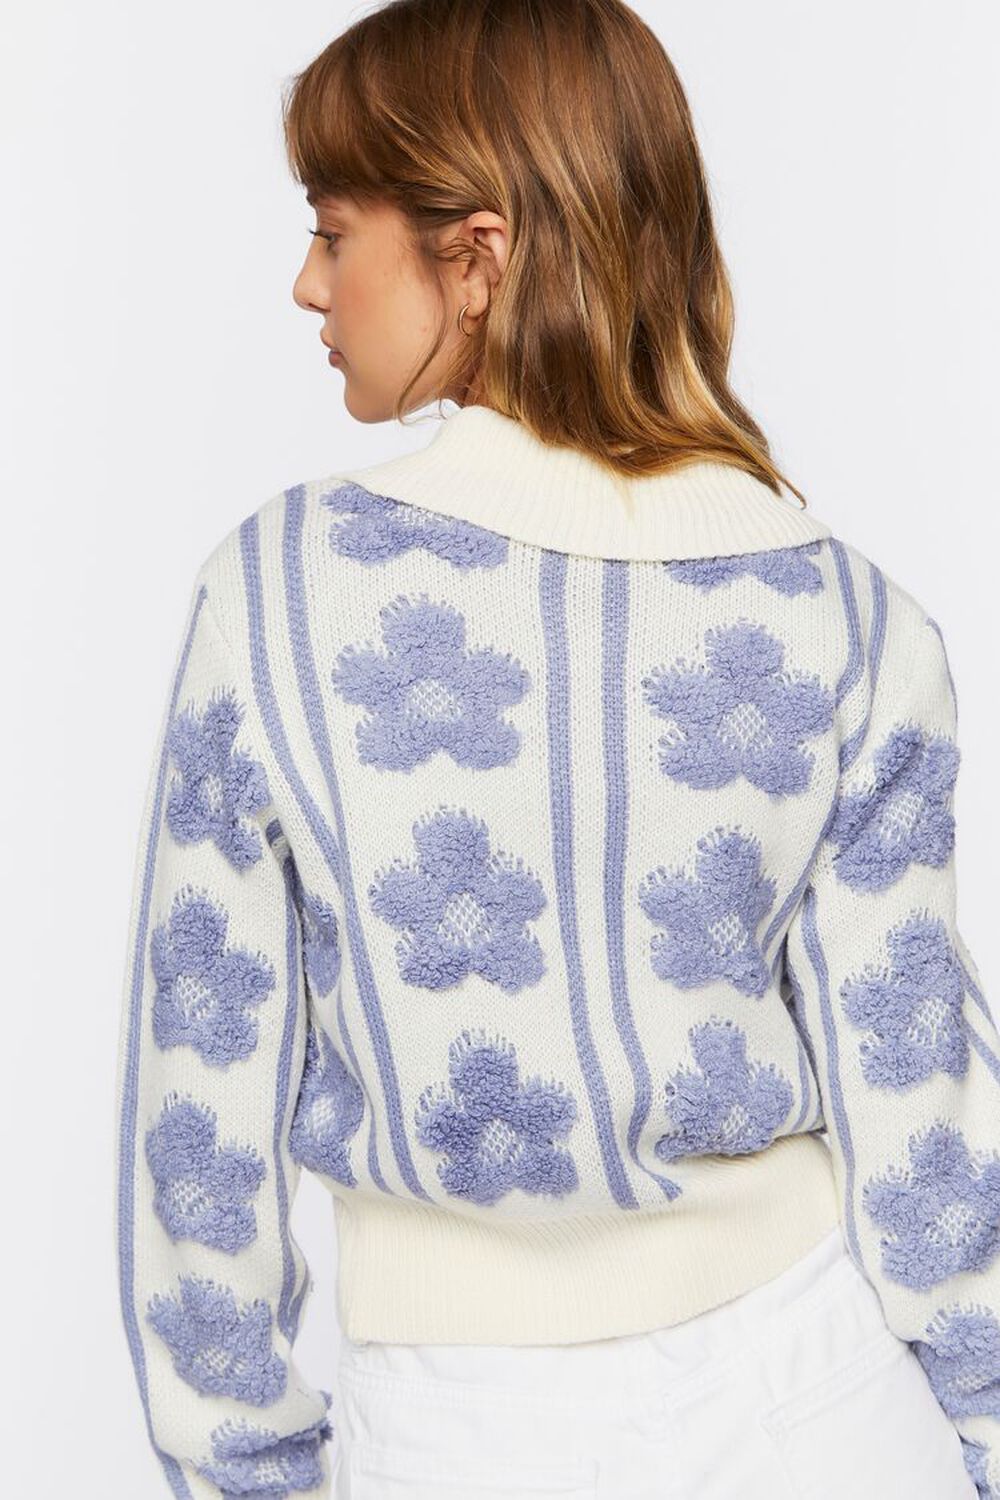 CREAM/BLUE Floral Print Sweater-Knit Top, image 3